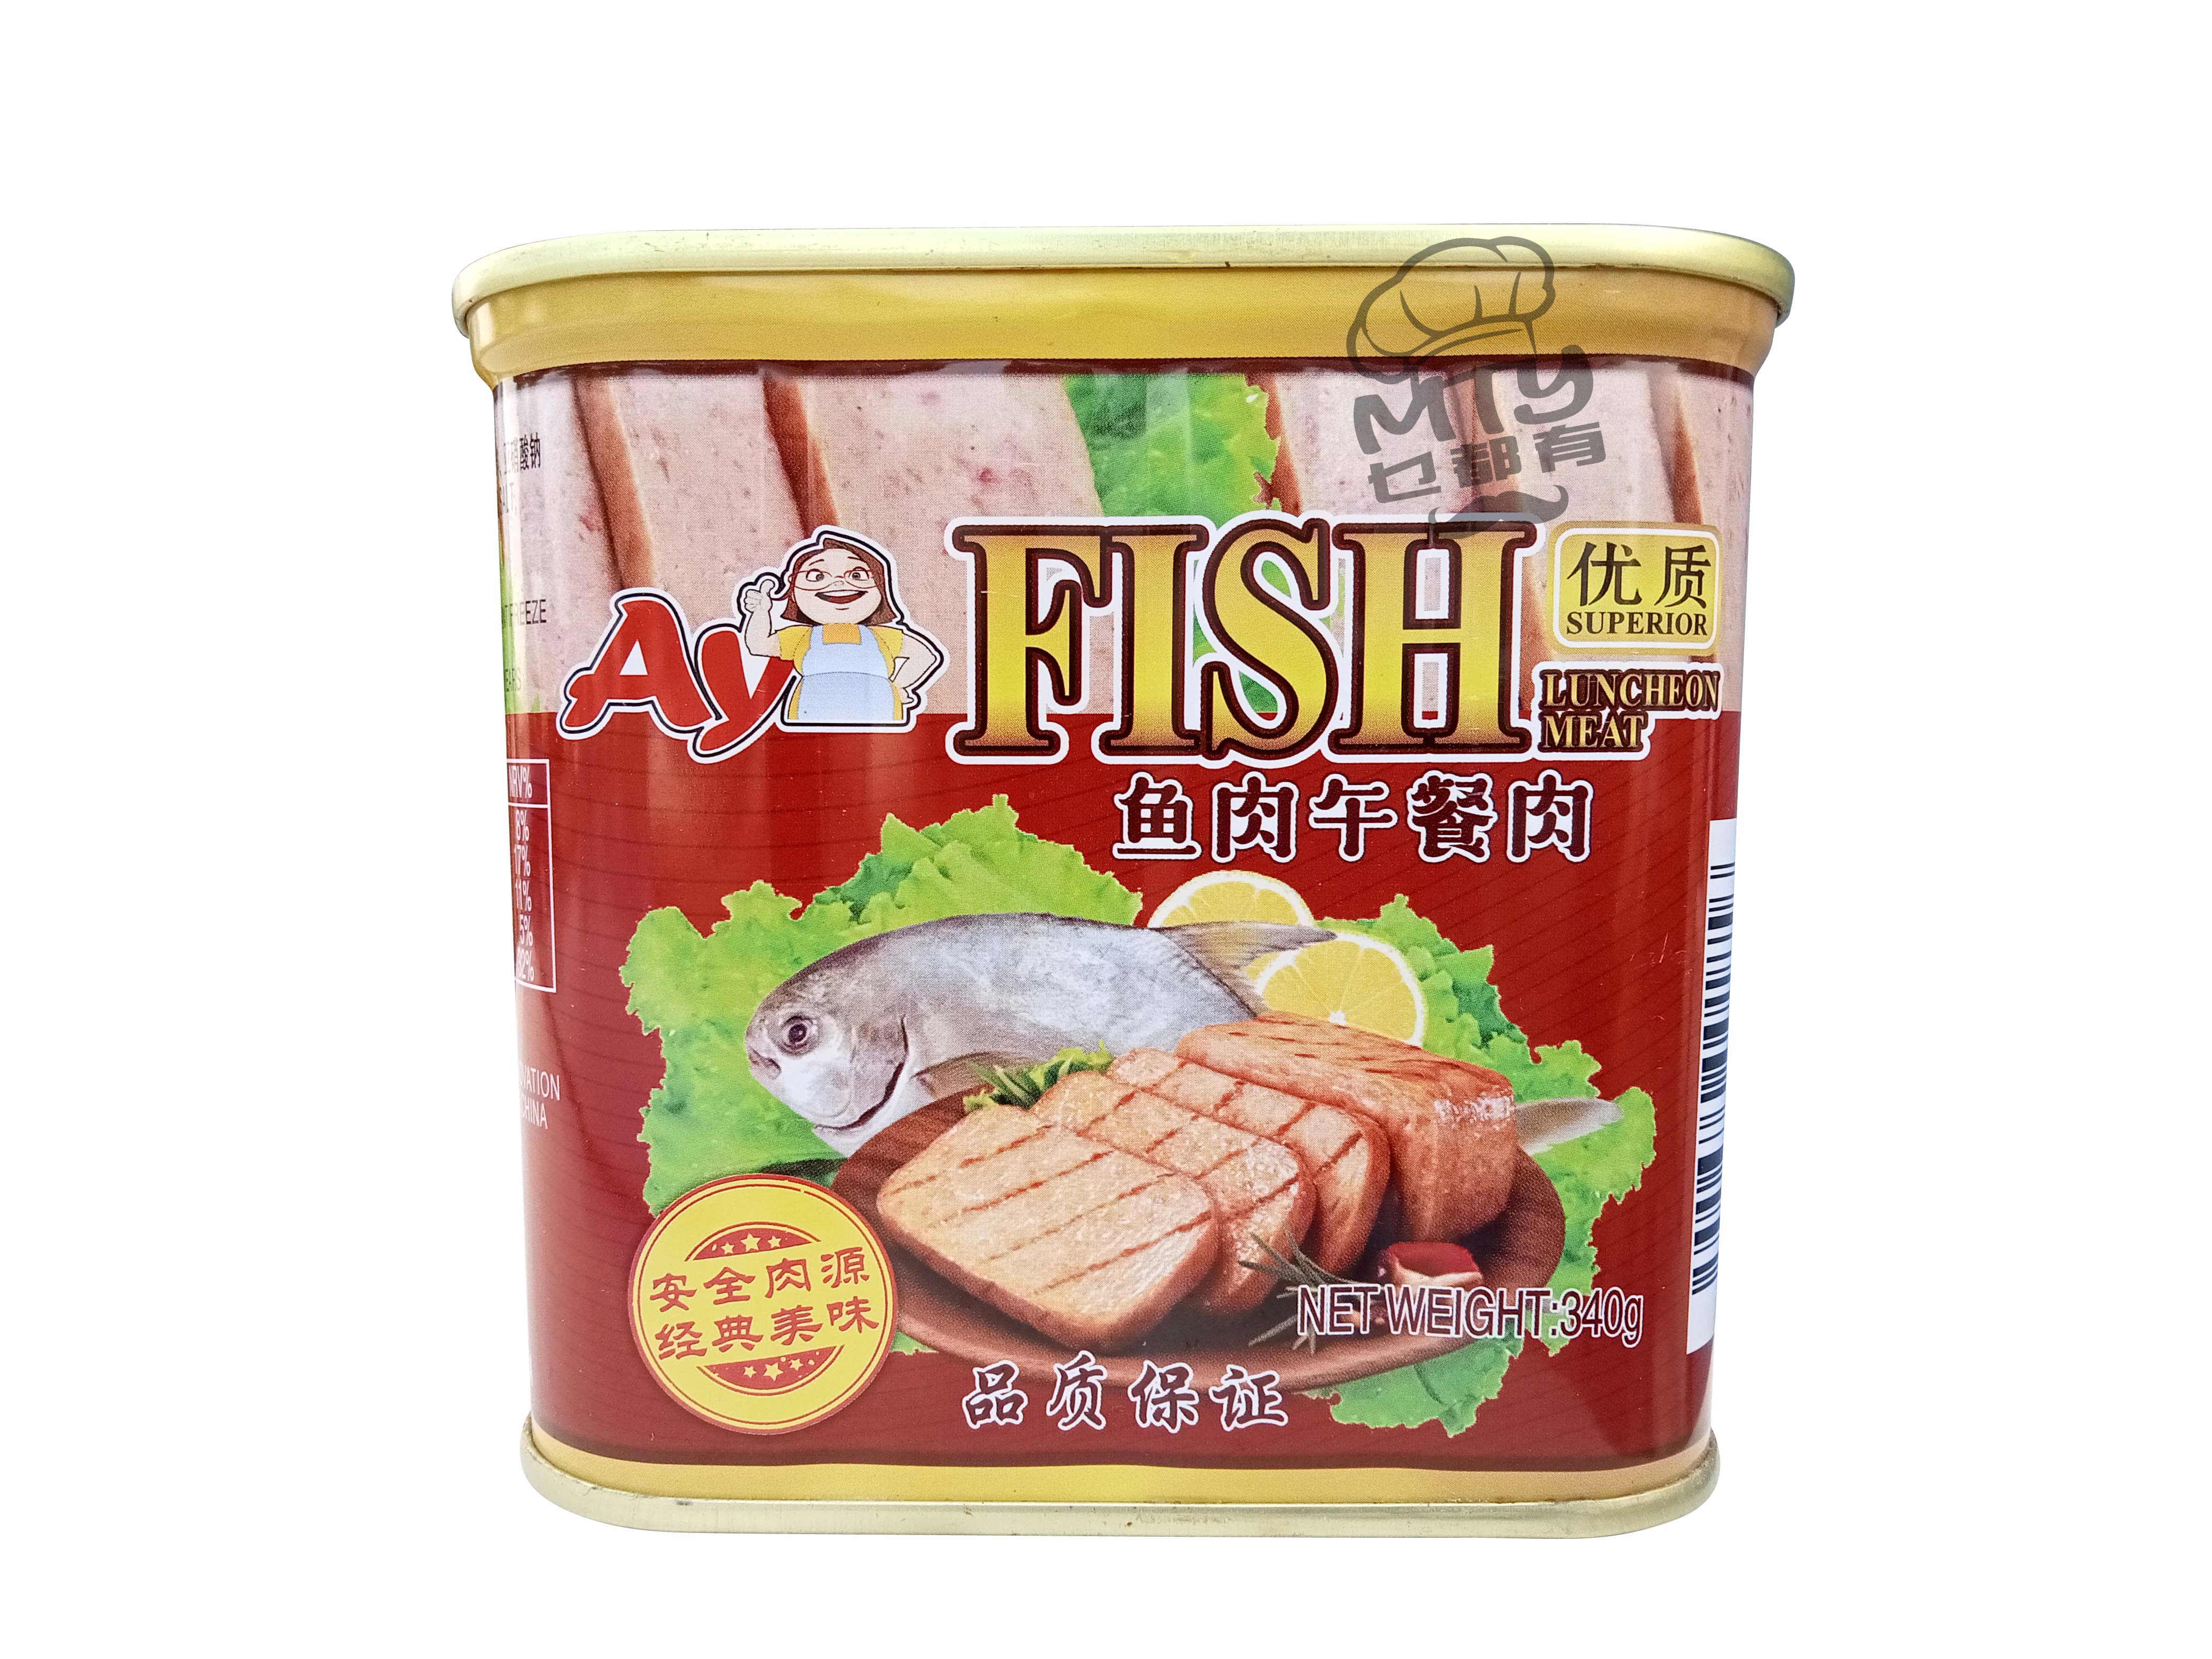 AYI Superior Fish Luncheon Meat 340g